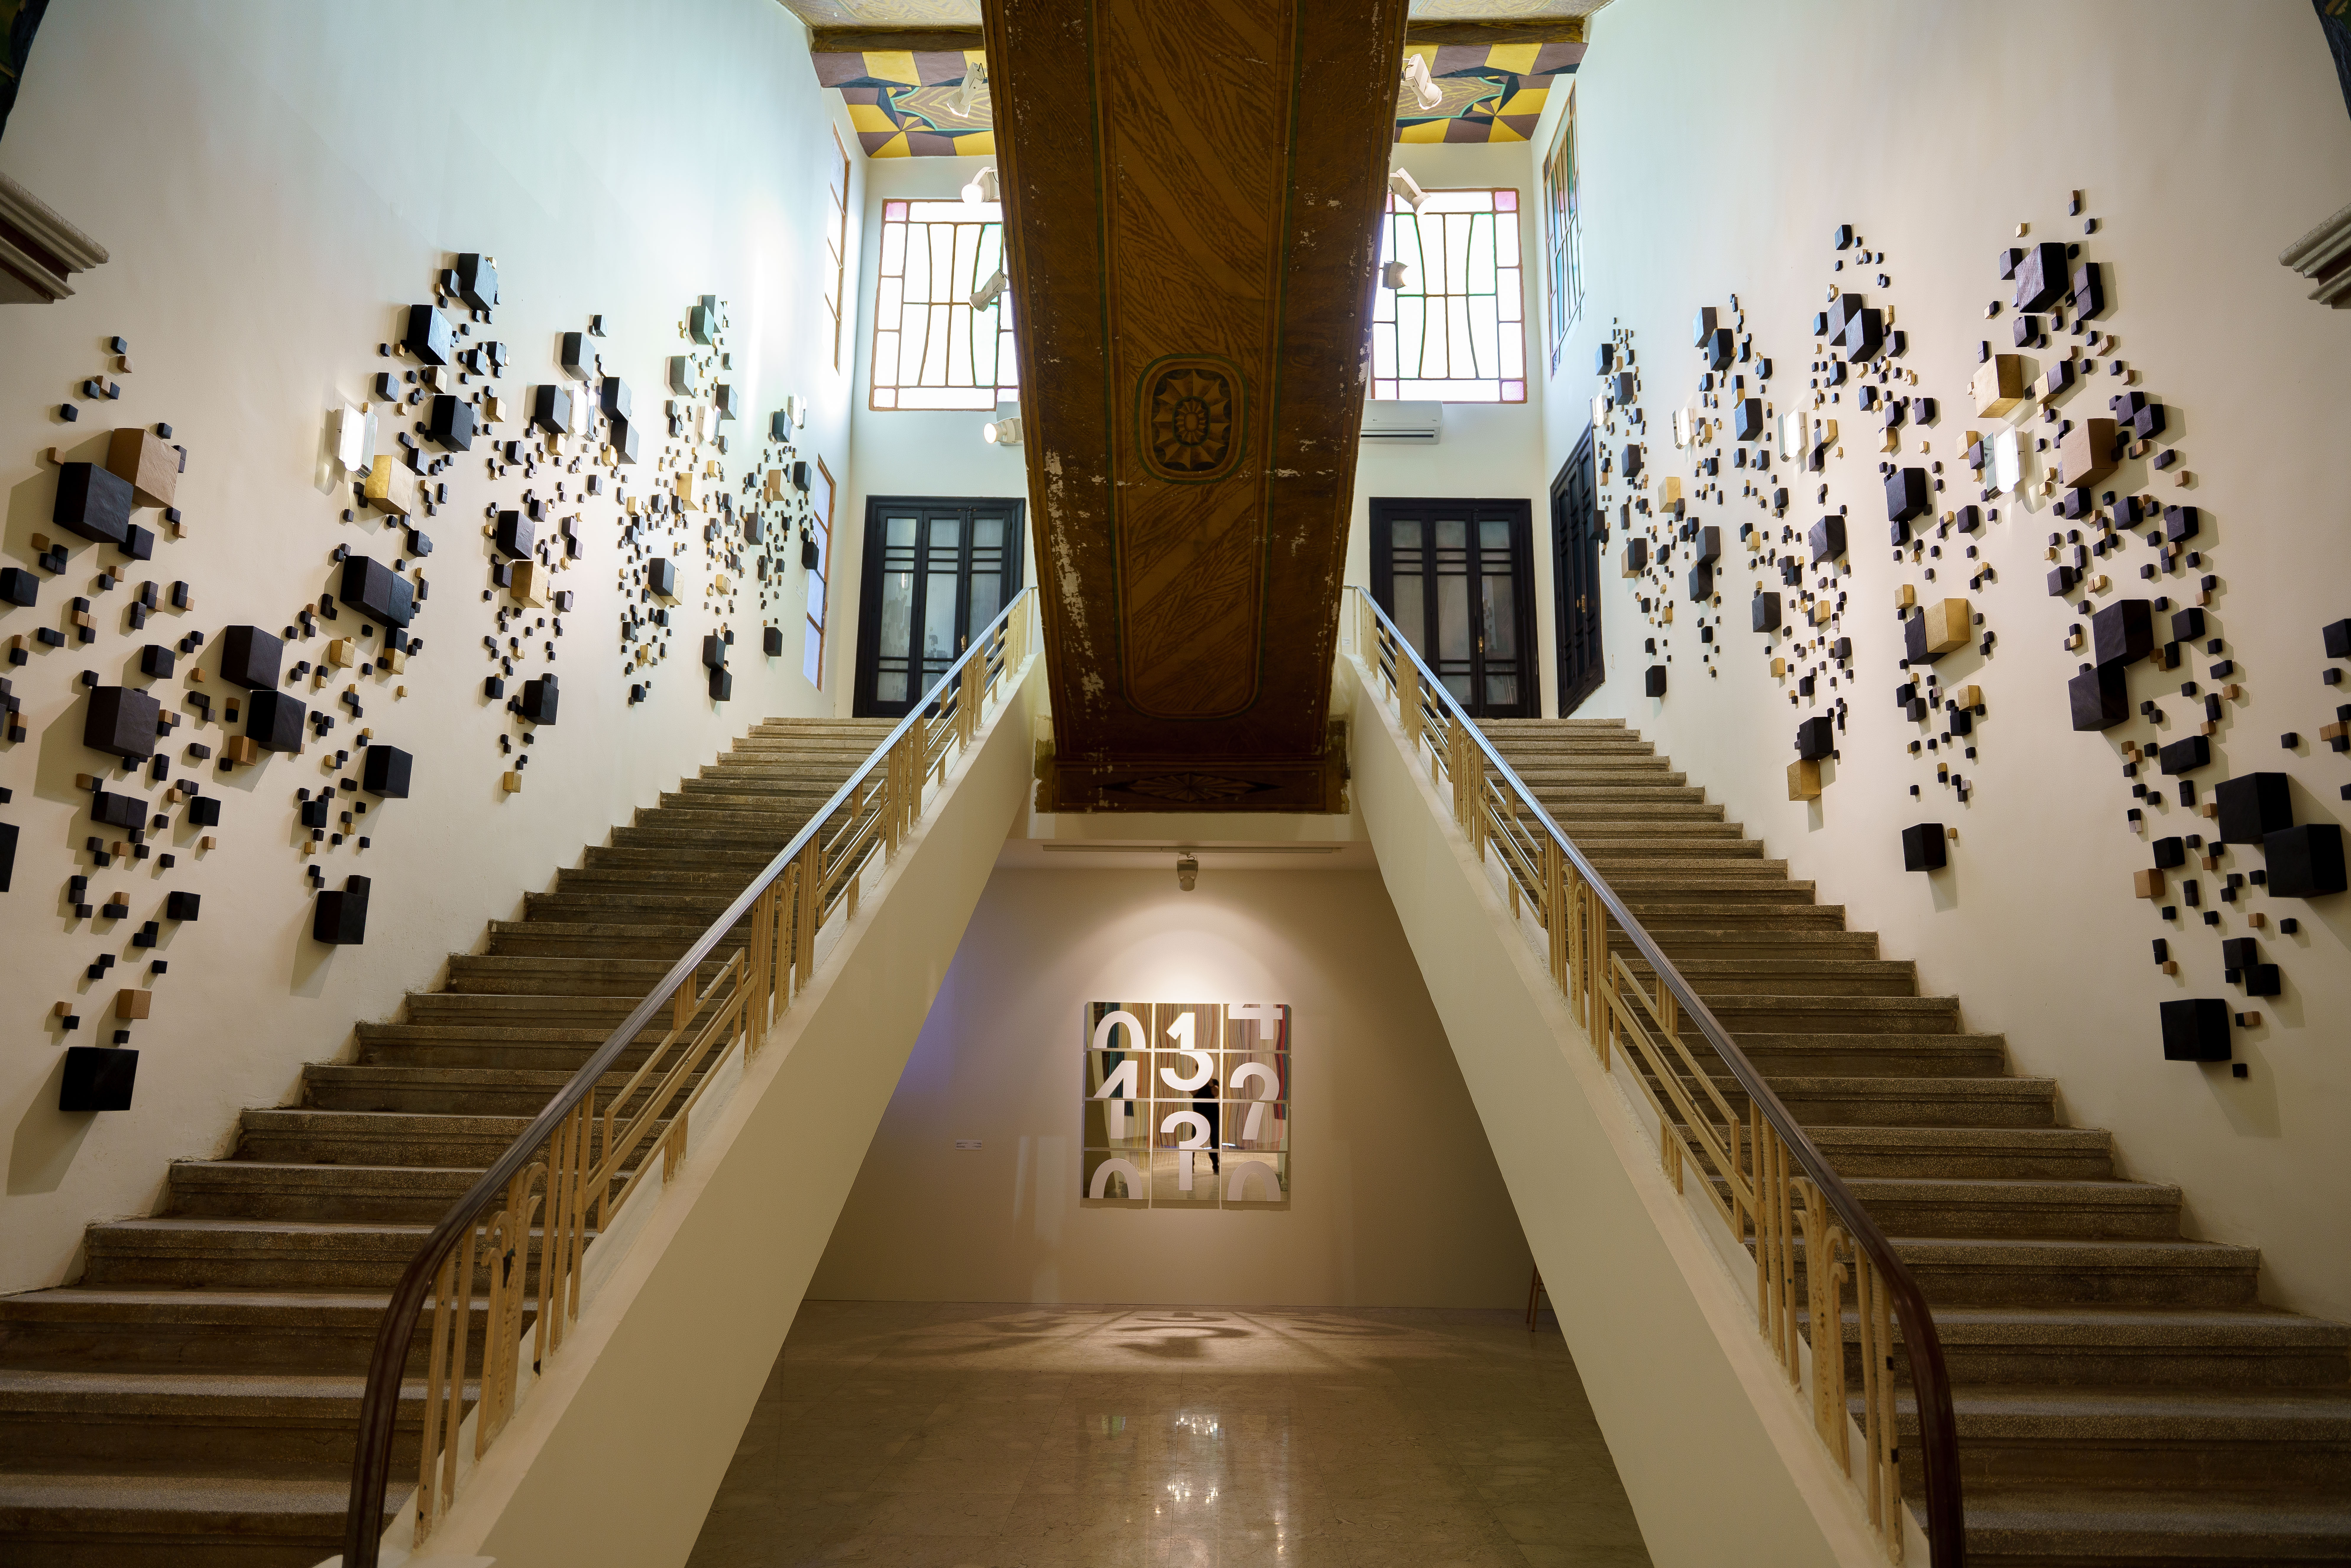 Installation view of 'Echoes', which features works by Seve Favre installed along the staircase of Qasr Khuzam. Photo: Xippas Gallery